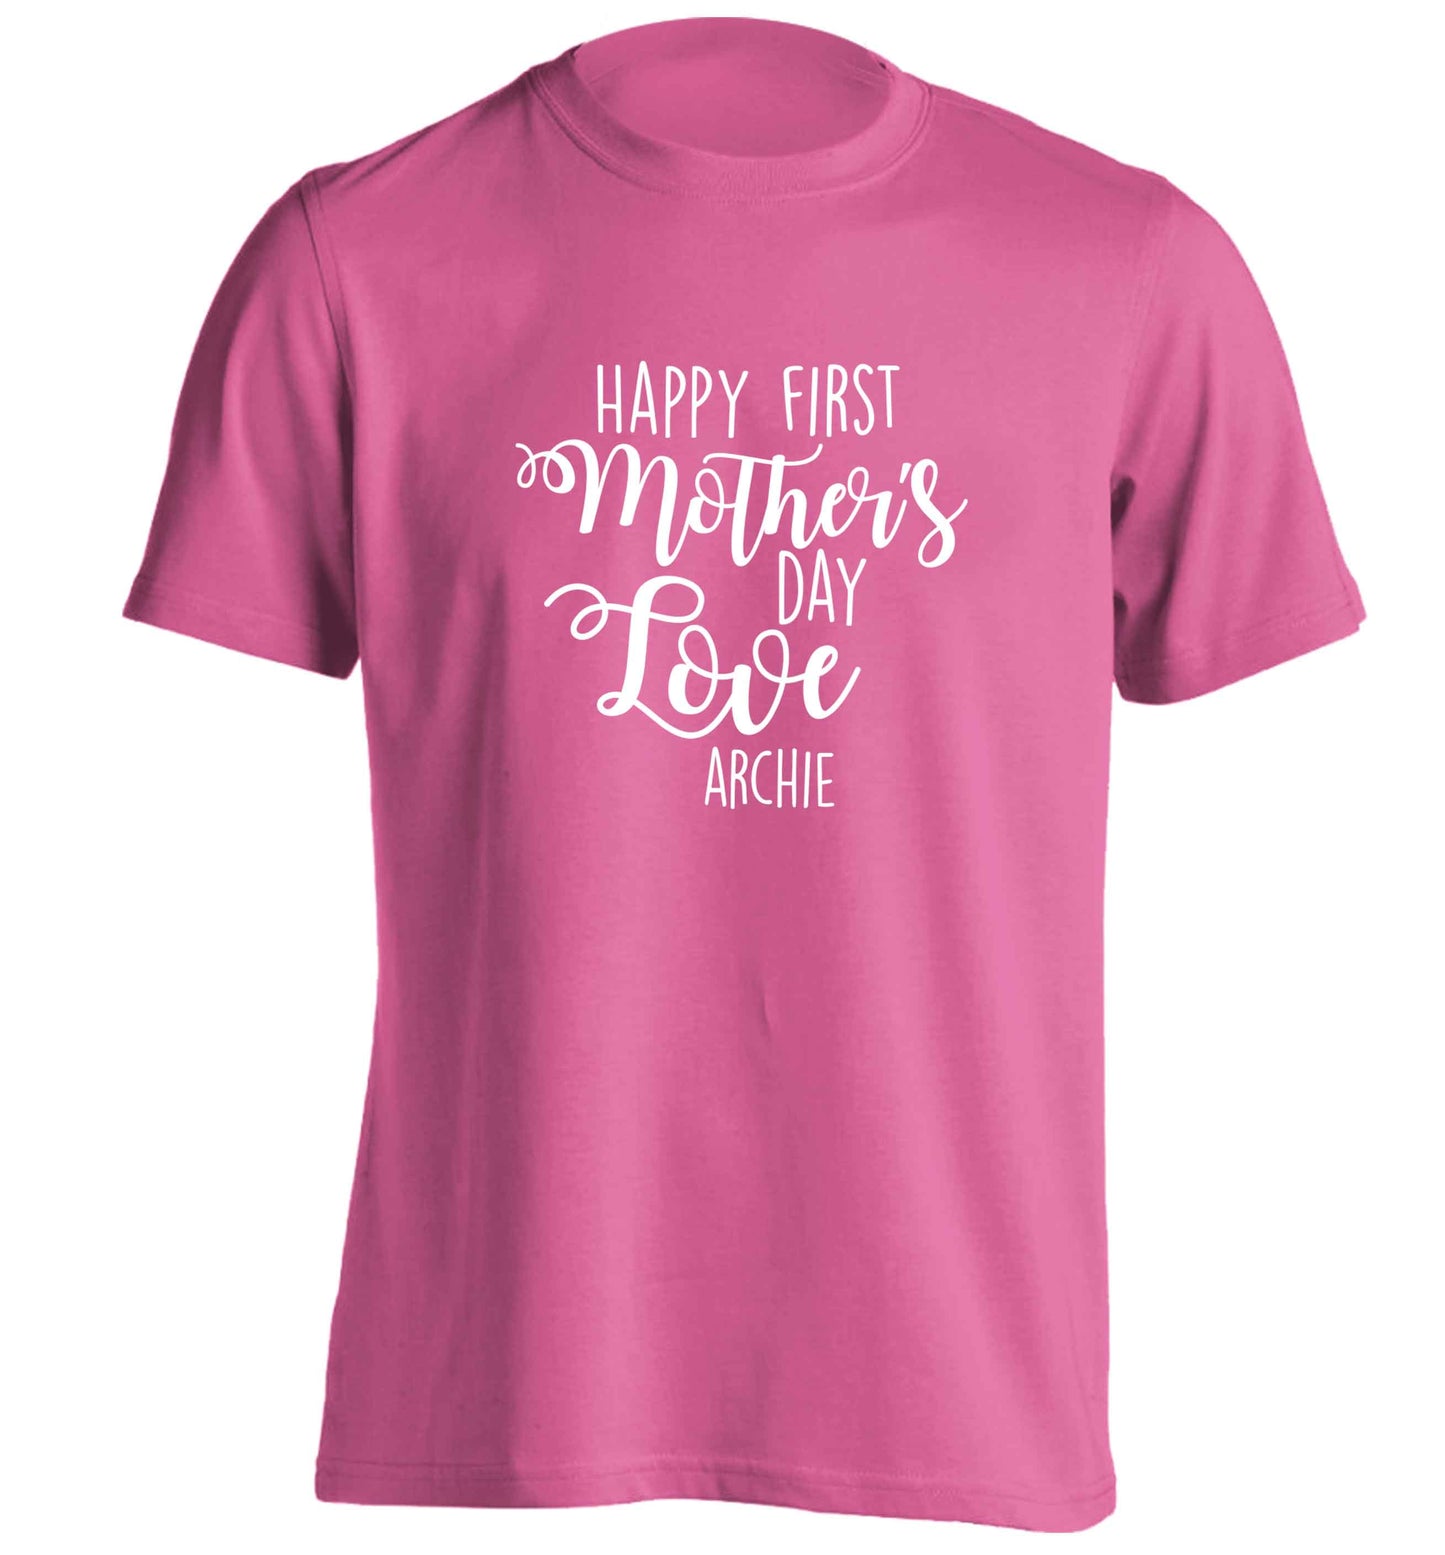 Personalised happy first mother's day love adults unisex pink Tshirt 2XL